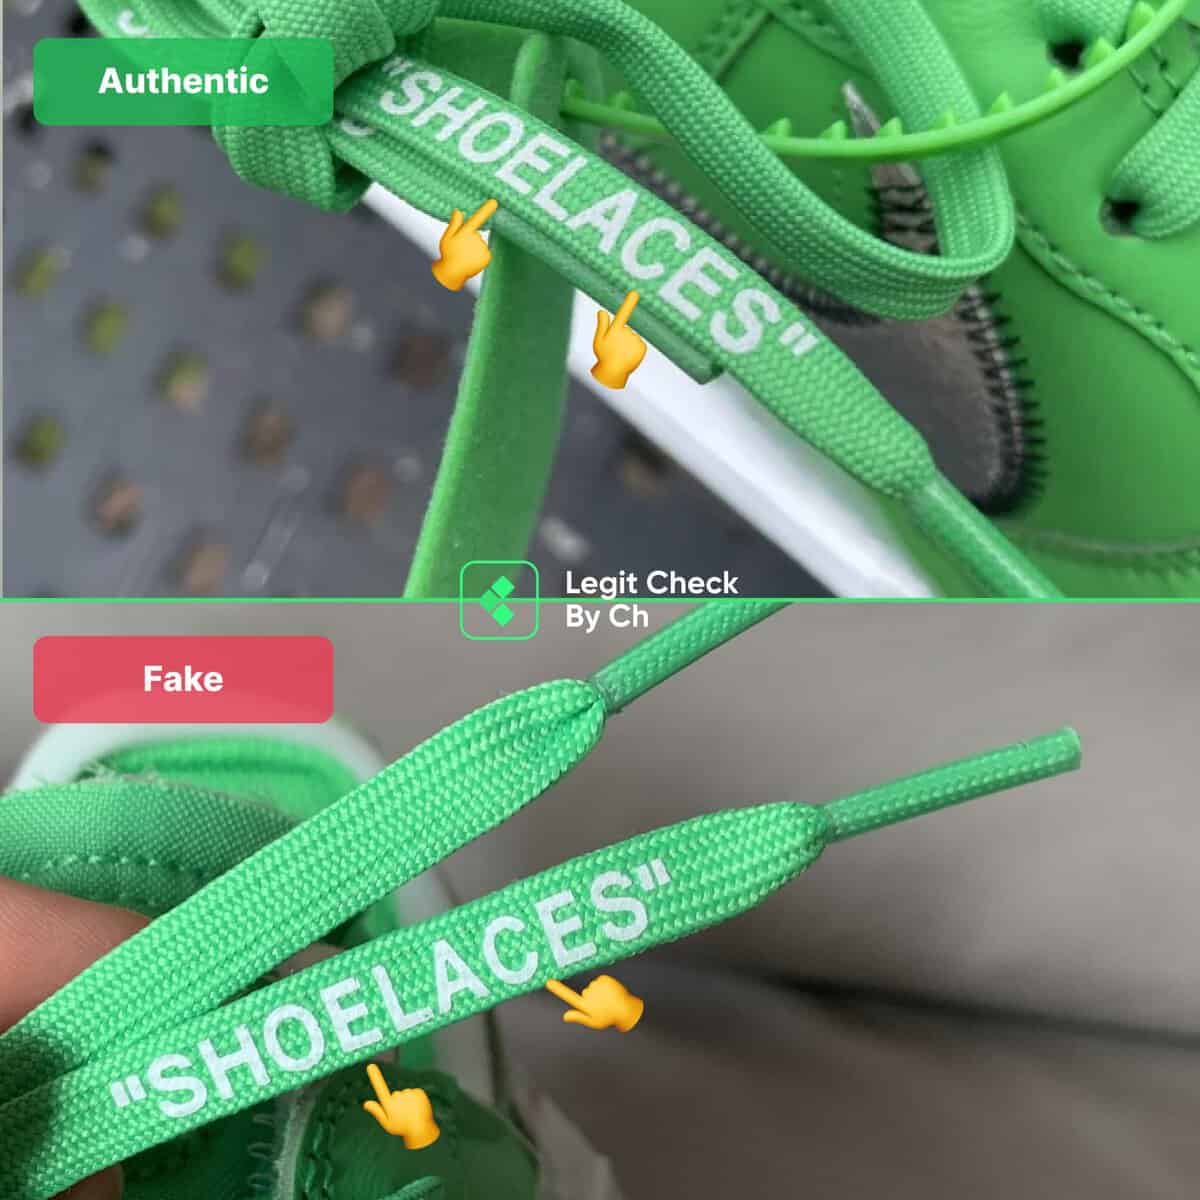 QC Nike Air Force 1 Low Off White Brooklyn Light Green Spark,From COPTOP :  r/RepsneakersDogs